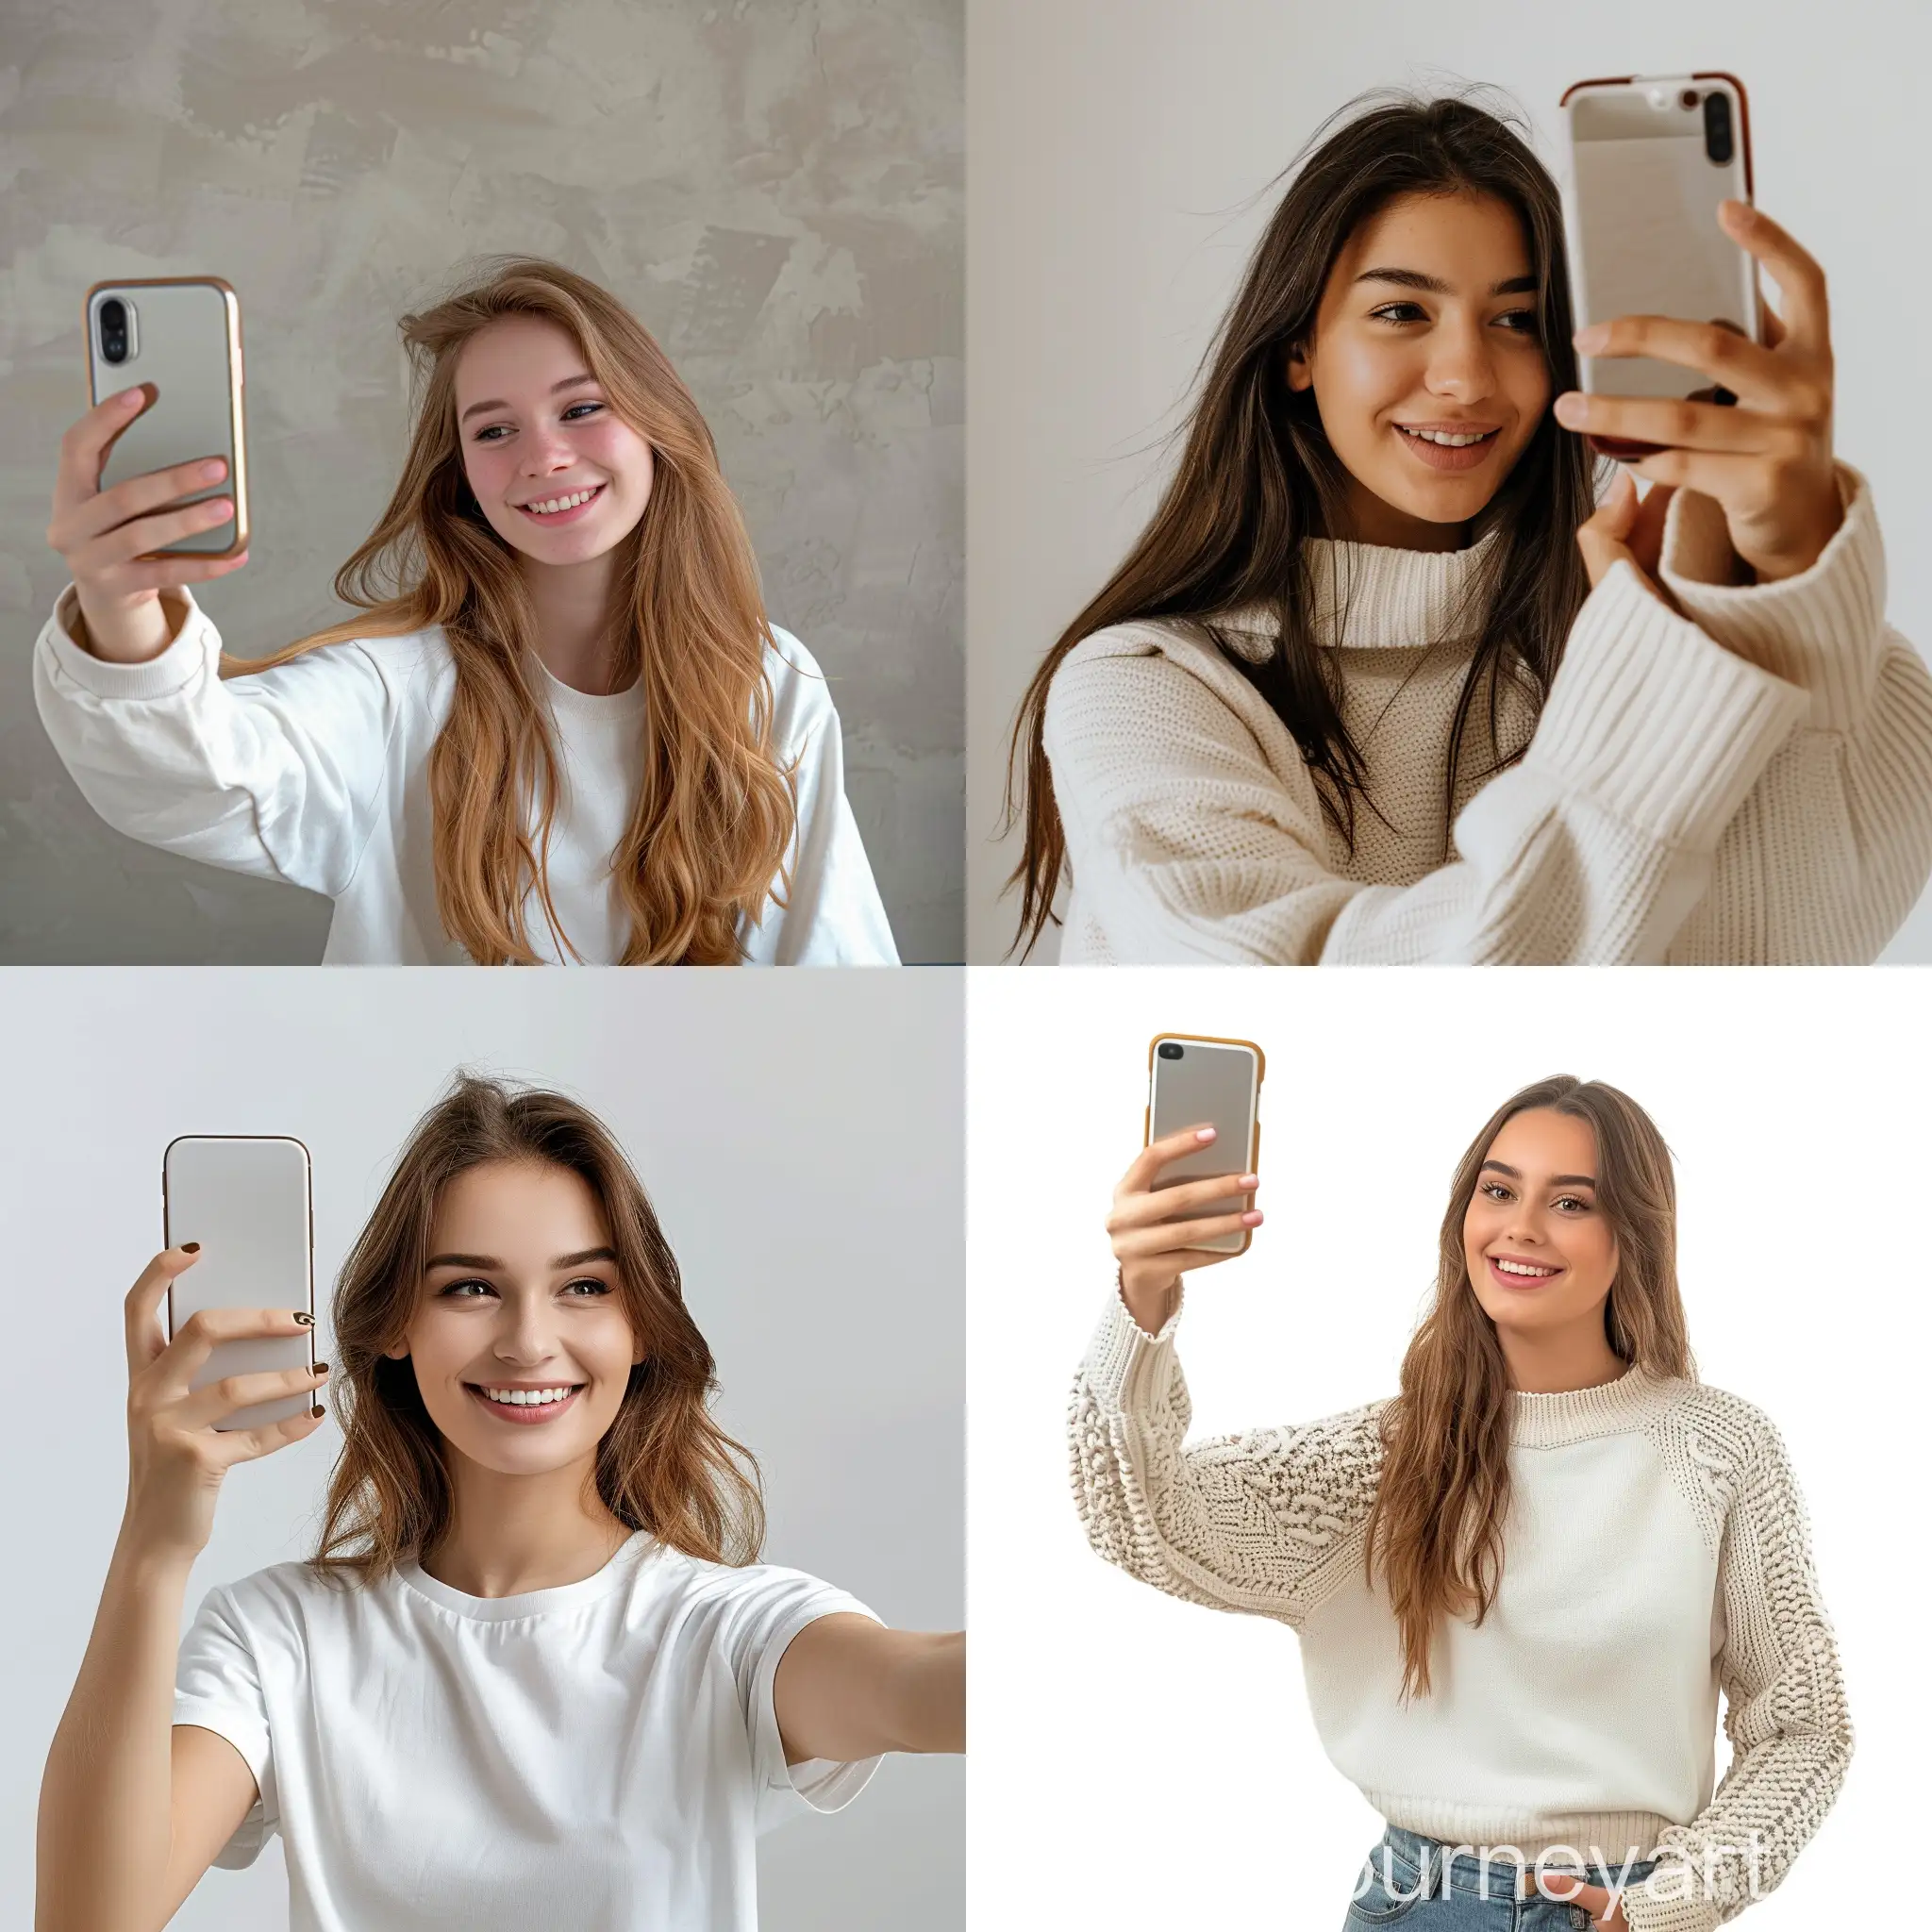 Young woman taking a selfie 